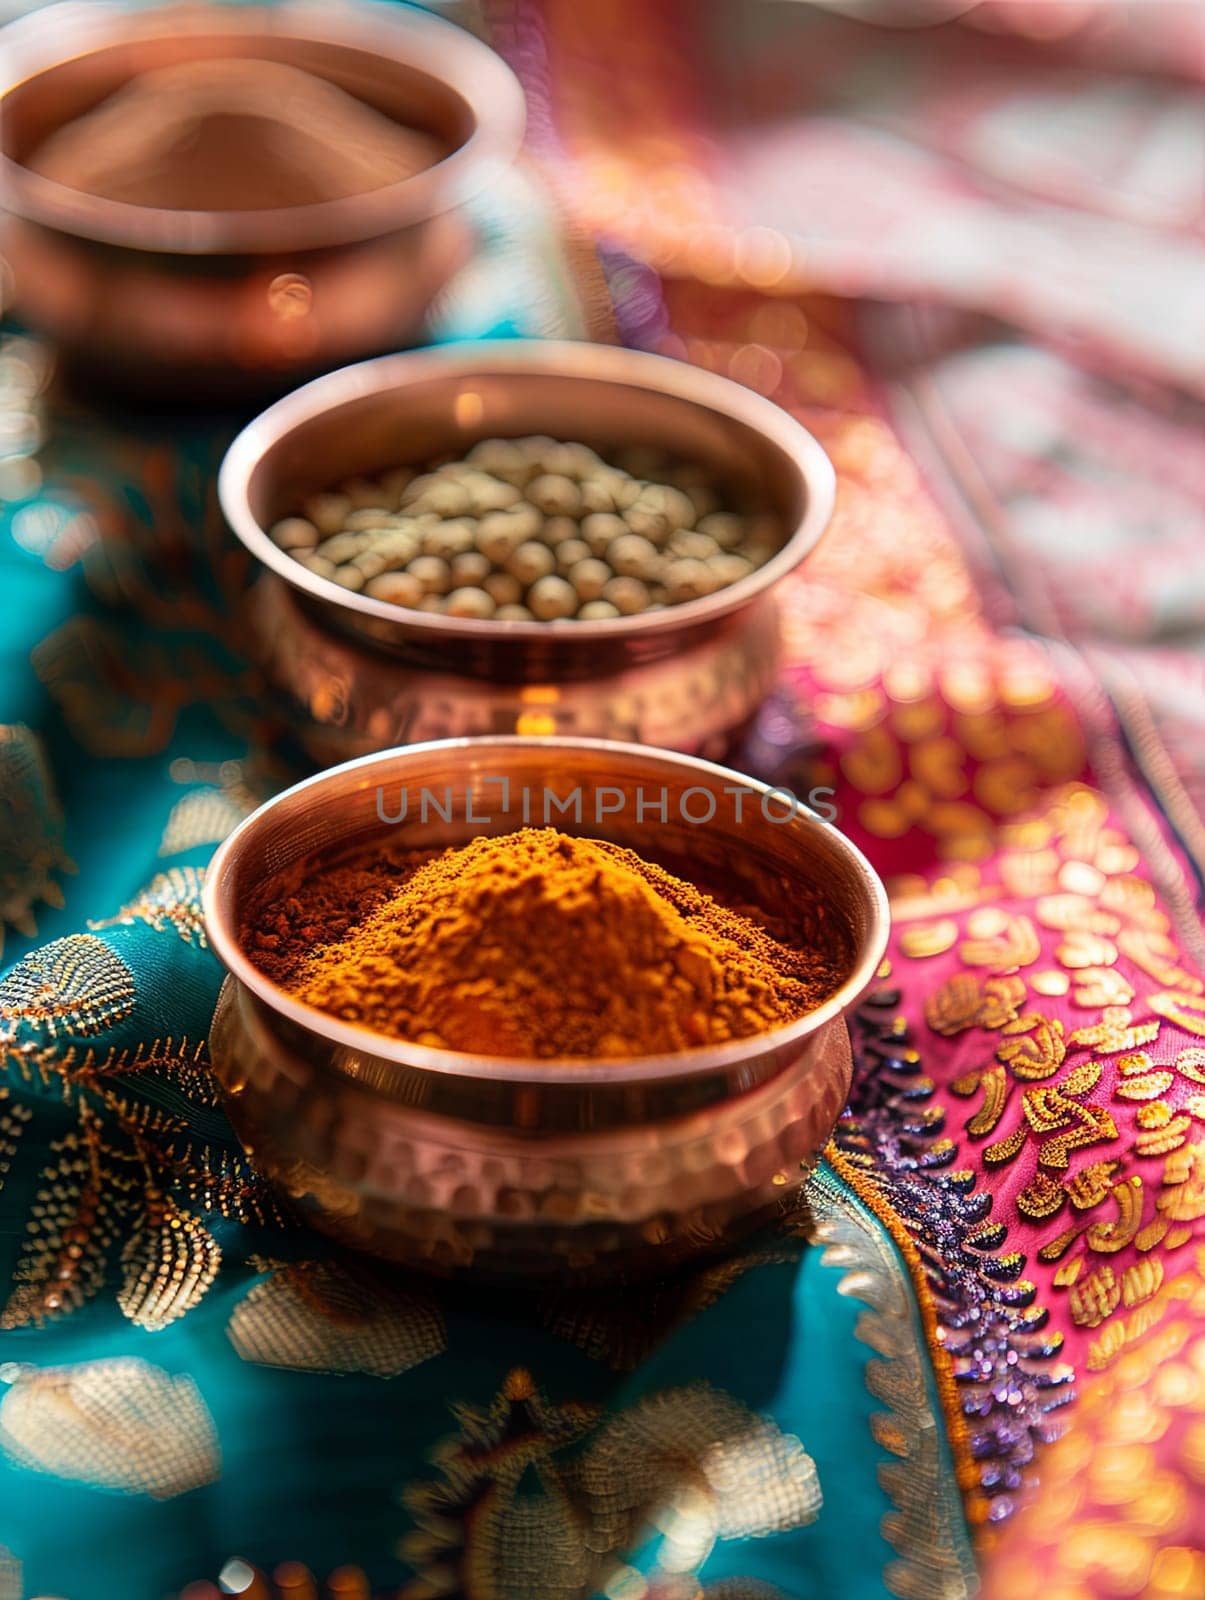 A close-up shot of traditional Indian spices in copper bowls, resting on a colorful fabric background. The spices, including turmeric, cumin, coriander, and garam masala, create a vibrant and fragrant scene.